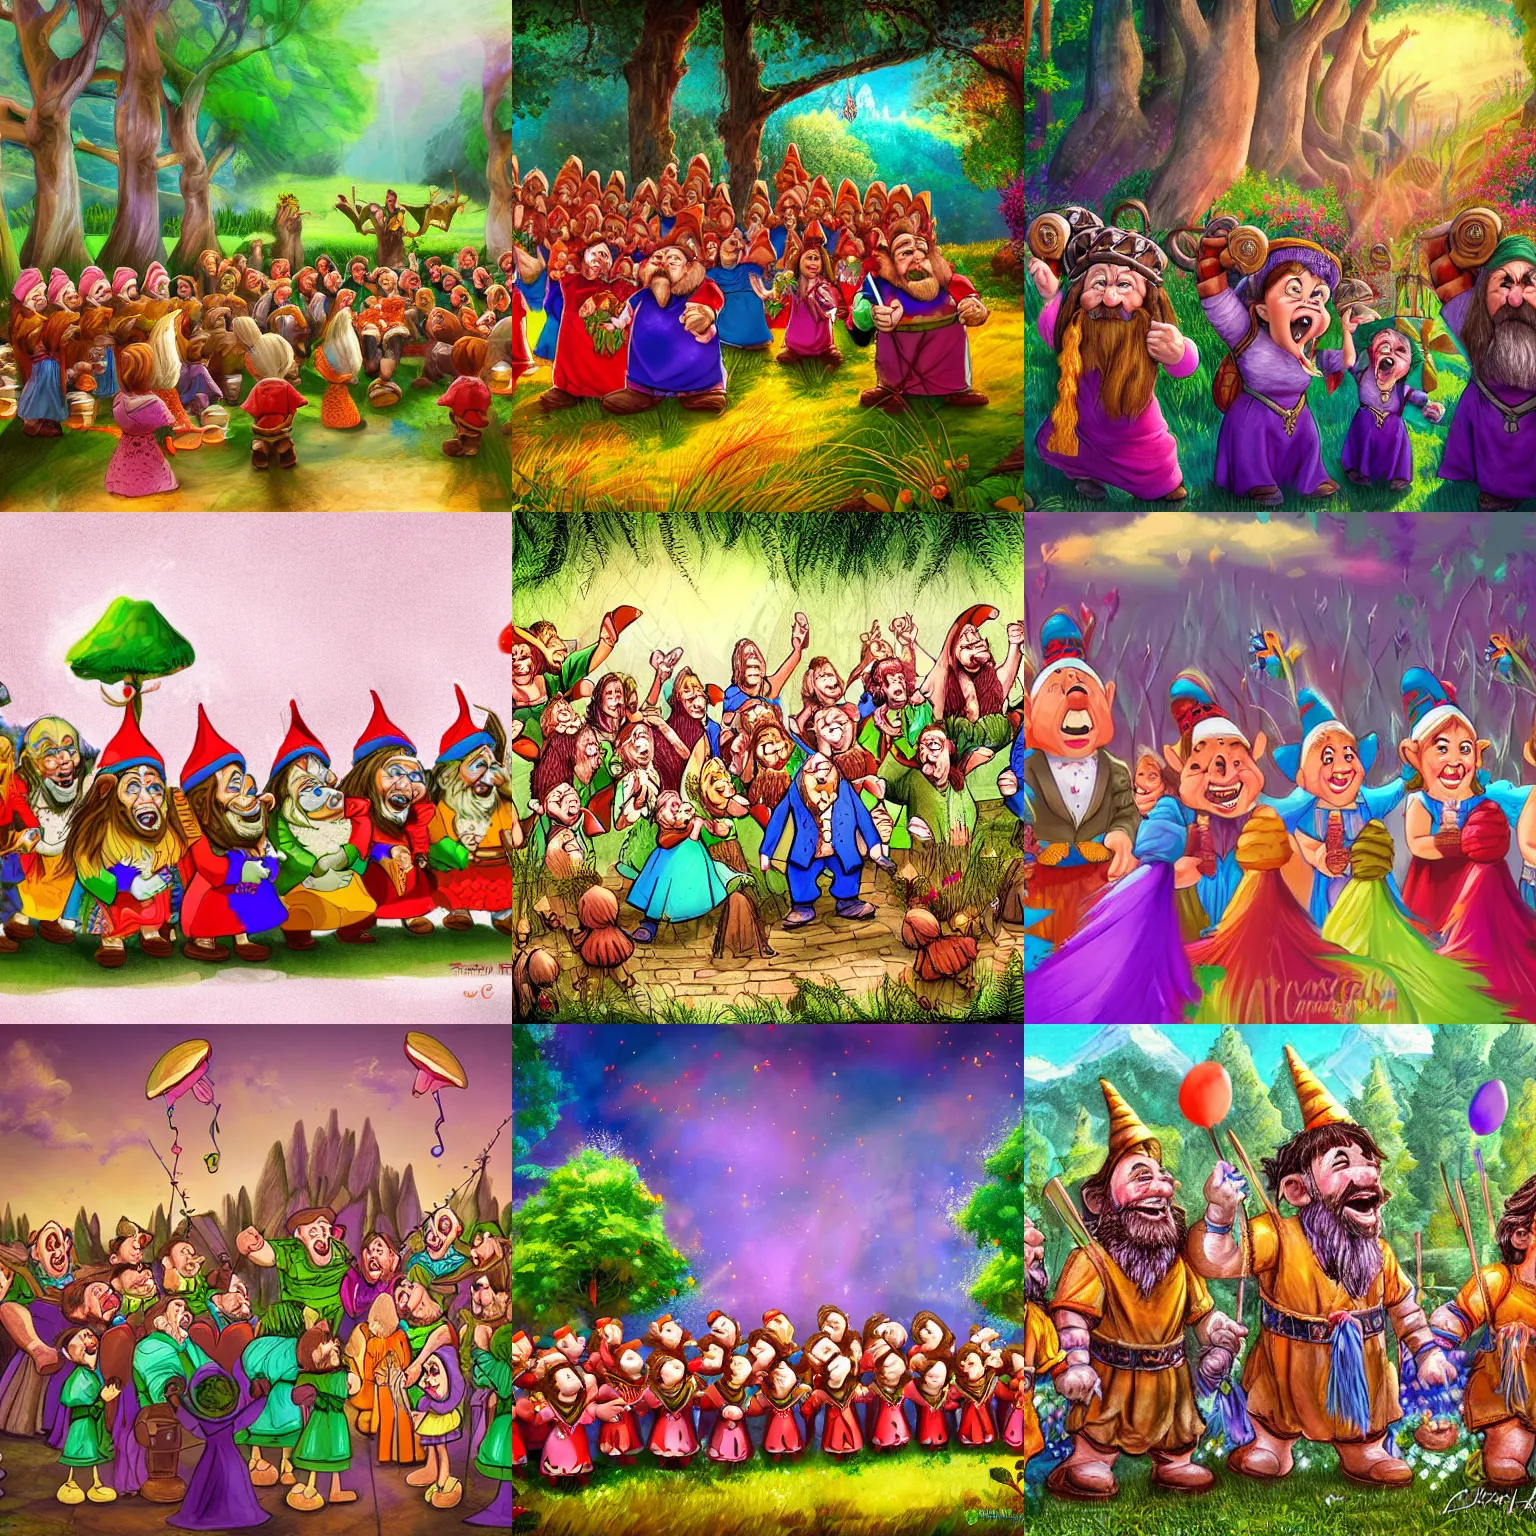 Prompt: chorus of dwarfs celebrating at wedding ceremony colorful nature highly detailed vibrant colors concept art fantasy style